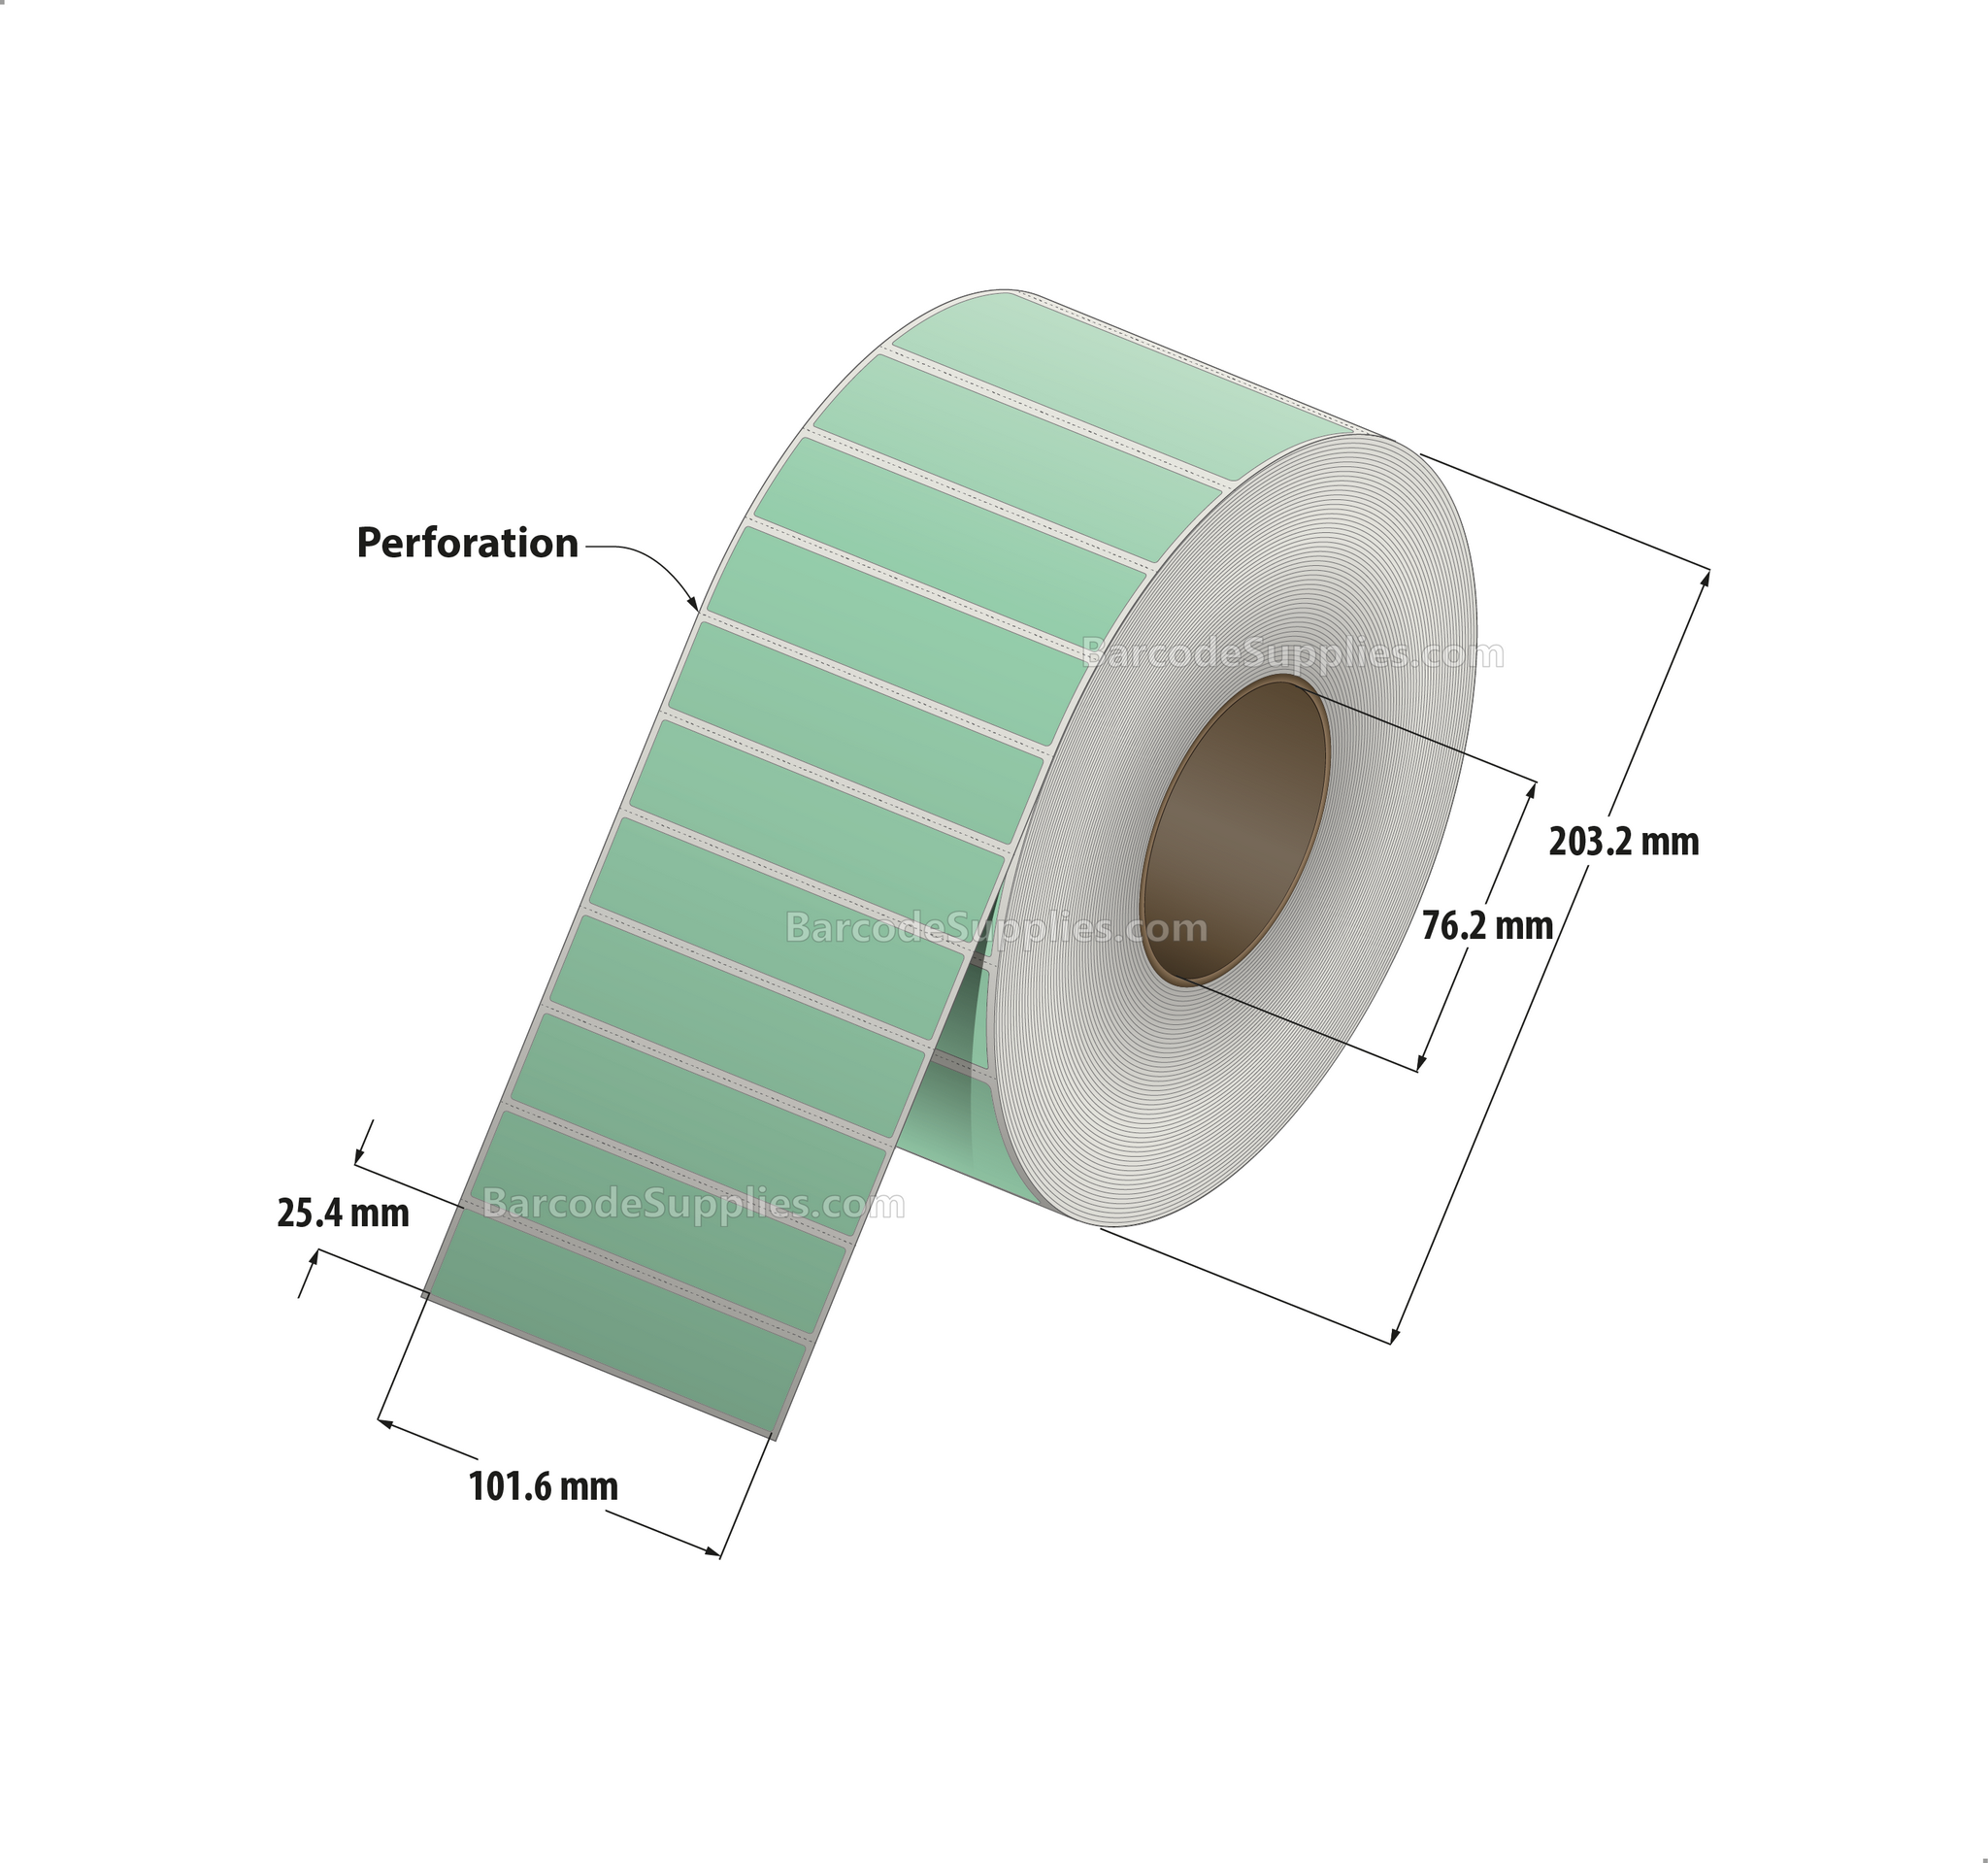 4 x 1 Thermal Transfer 345 Green Labels With Permanent Adhesive - Perforated - 5500 Labels Per Roll - Carton Of 4 Rolls - 22000 Labels Total - MPN: RFC-4-1-5500-GR